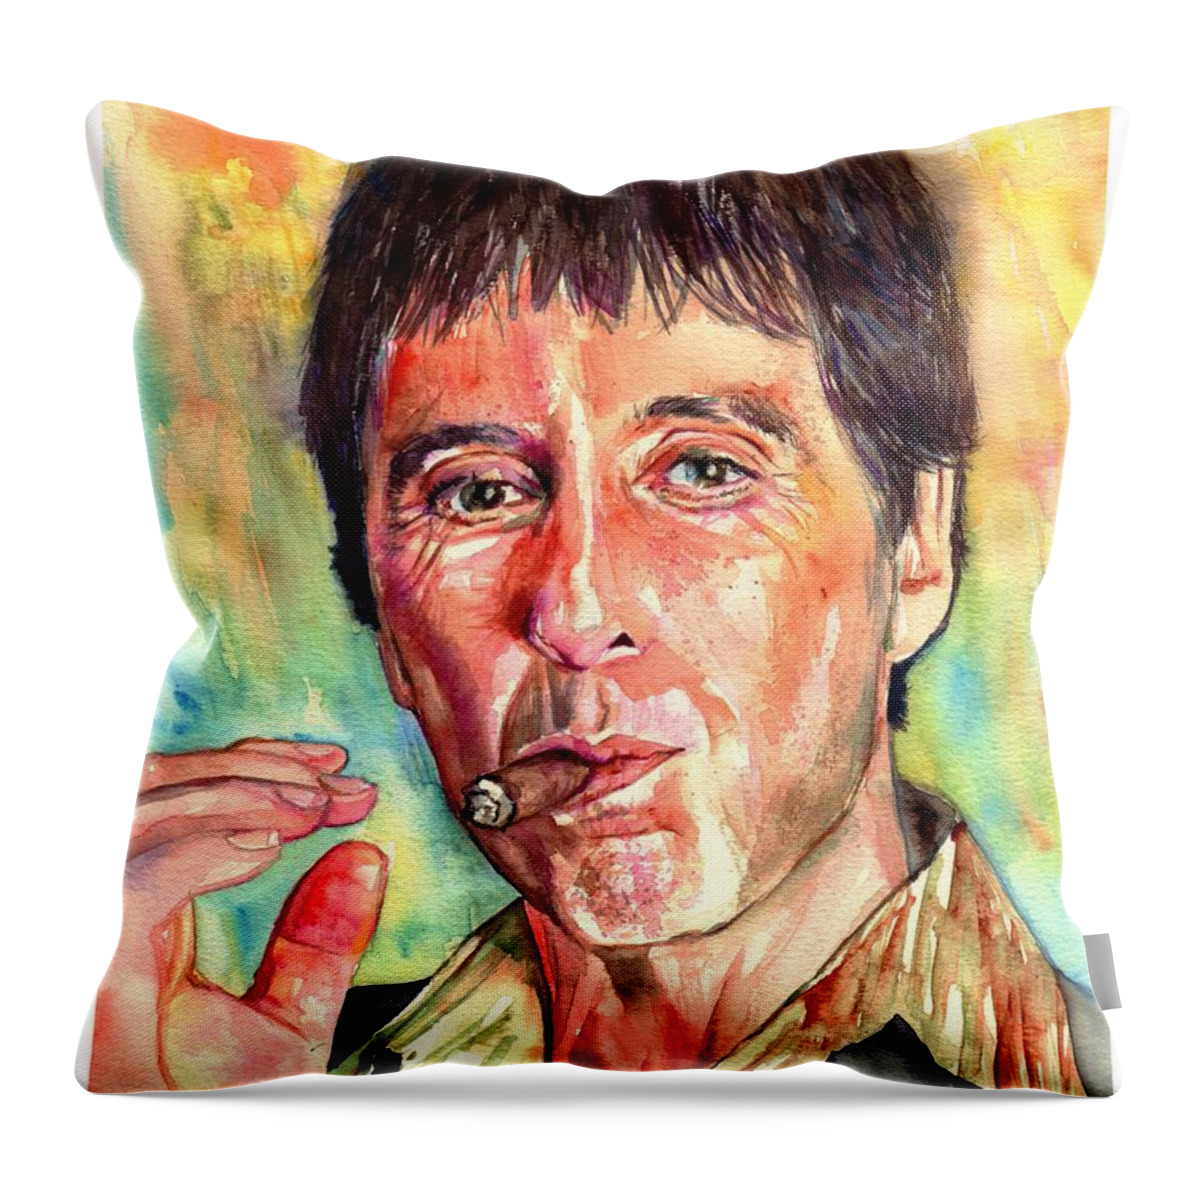 Al Pacino Throw Pillow featuring the painting Scarface by Suzann Sines